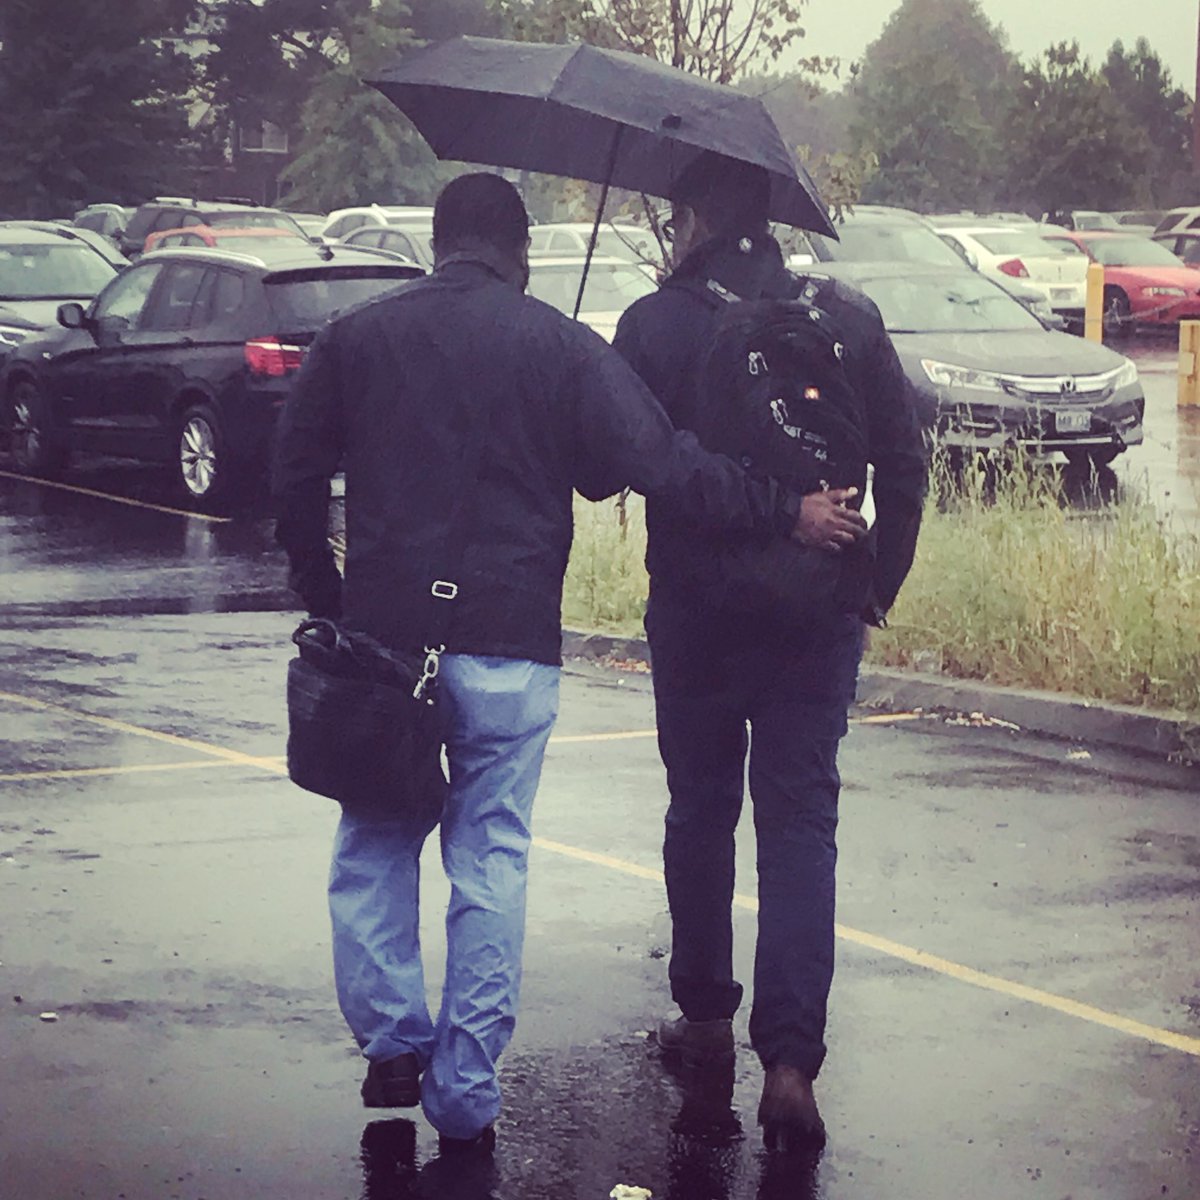 Residents protecting residents on a rainy day in Rhode Island. #candid #residentlove